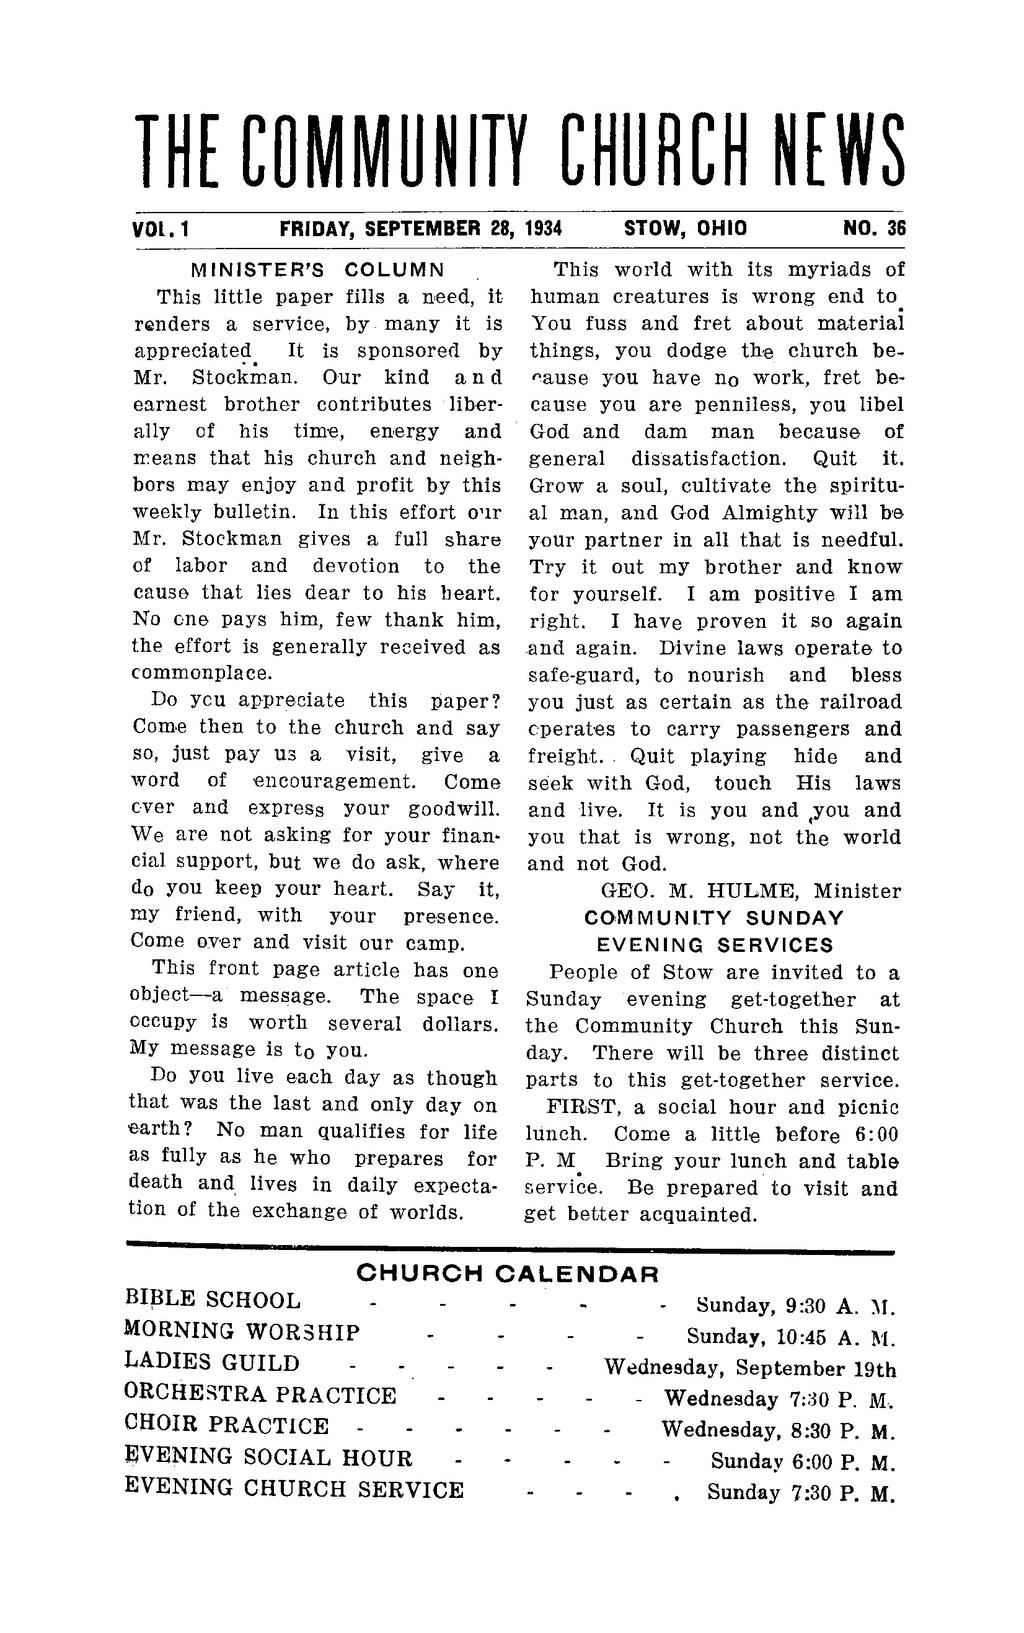 THE COMMUNITY CHURCH NEWS VOL.1 FRIDAY, SEPTEMBER 28, 1934 STOW, OHIO NO. 36 MINISTER'S COLUMN This little paper fills a need, it renders a service, by many it is appreciated It is sponsored by Mr.